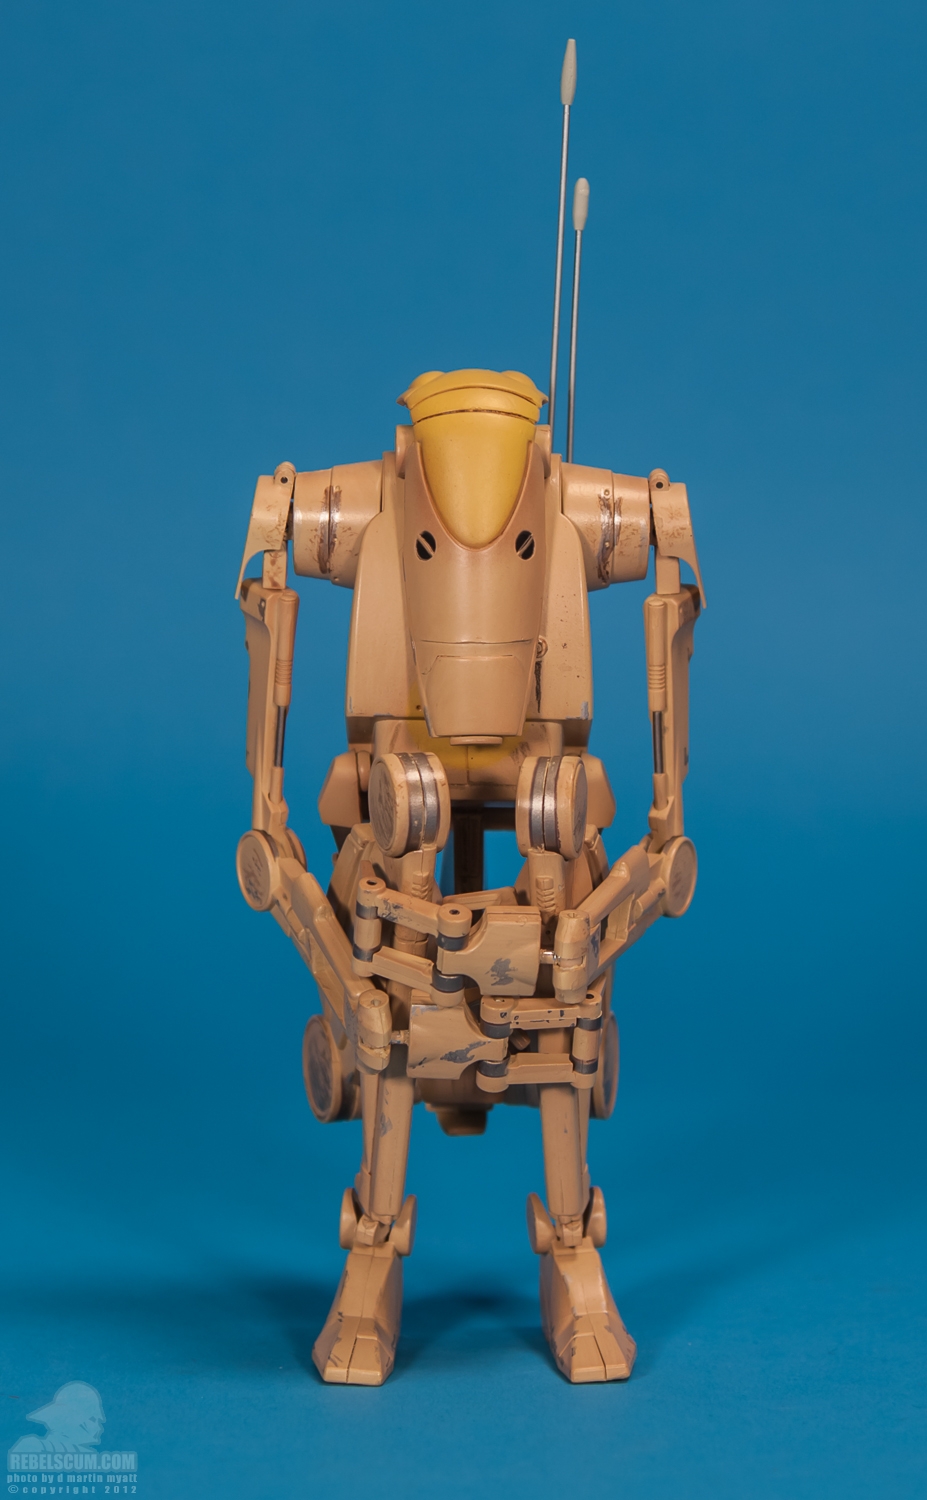 OOM-9_Battle_Droid_Commander_Sideshow_Collectibles-05.jpg